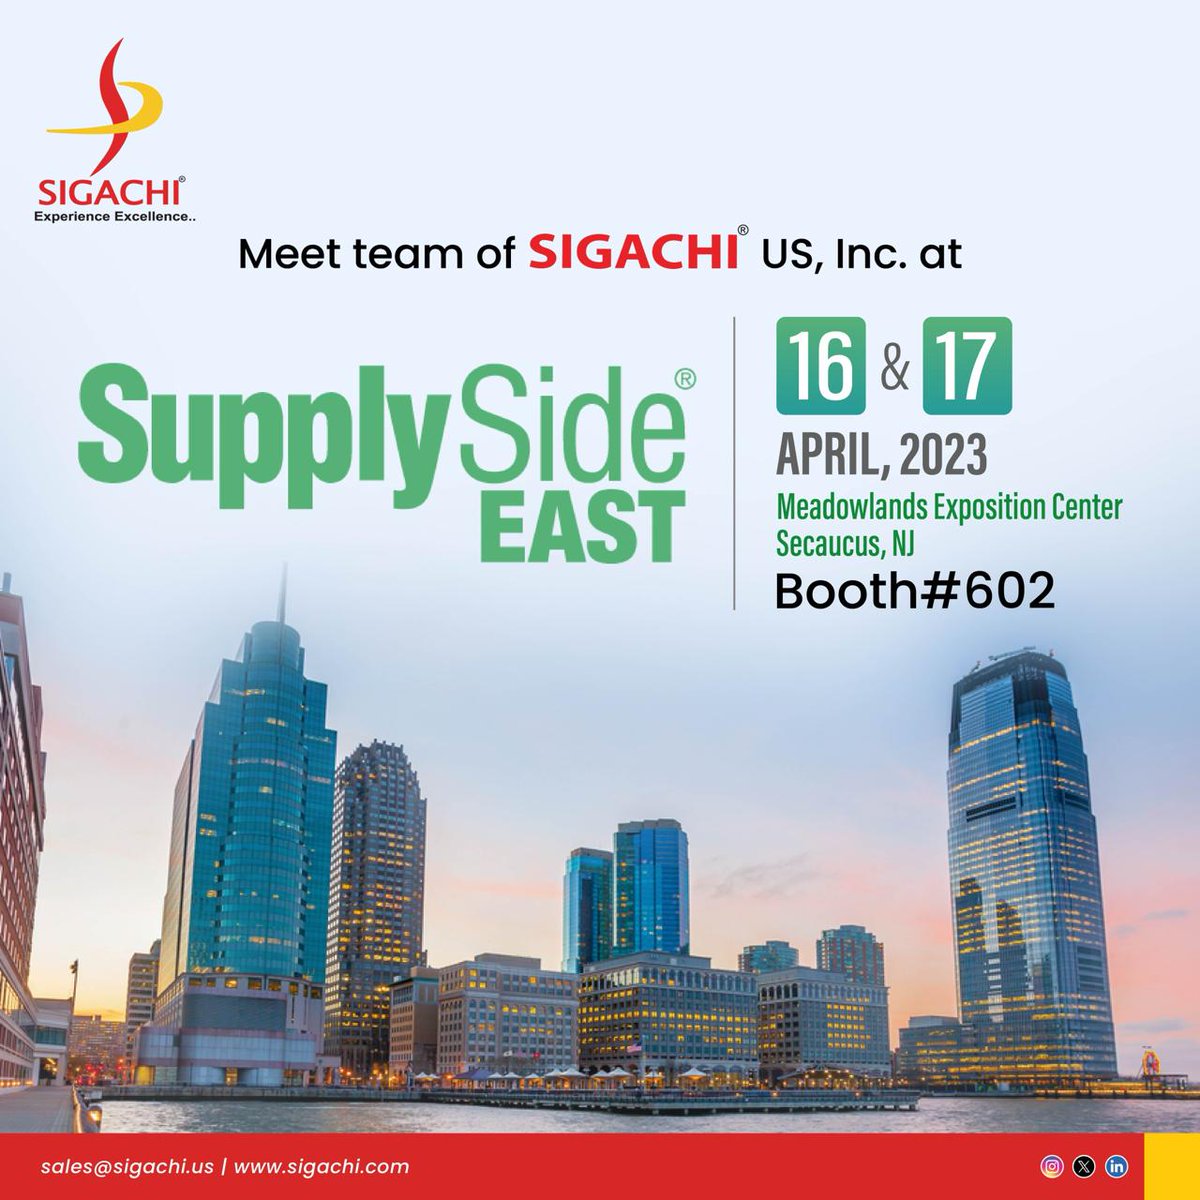 We will be exhibiting at prestigious #SupplySide East, happening April 16-17 at the Meadowlands Exposition Center in Secaucus, NJ! Visit us at Booth no. 602 to explore our proven high quality solutions for the #pharmaceutical industry!
#LifeSciences #ExperienceExcellence